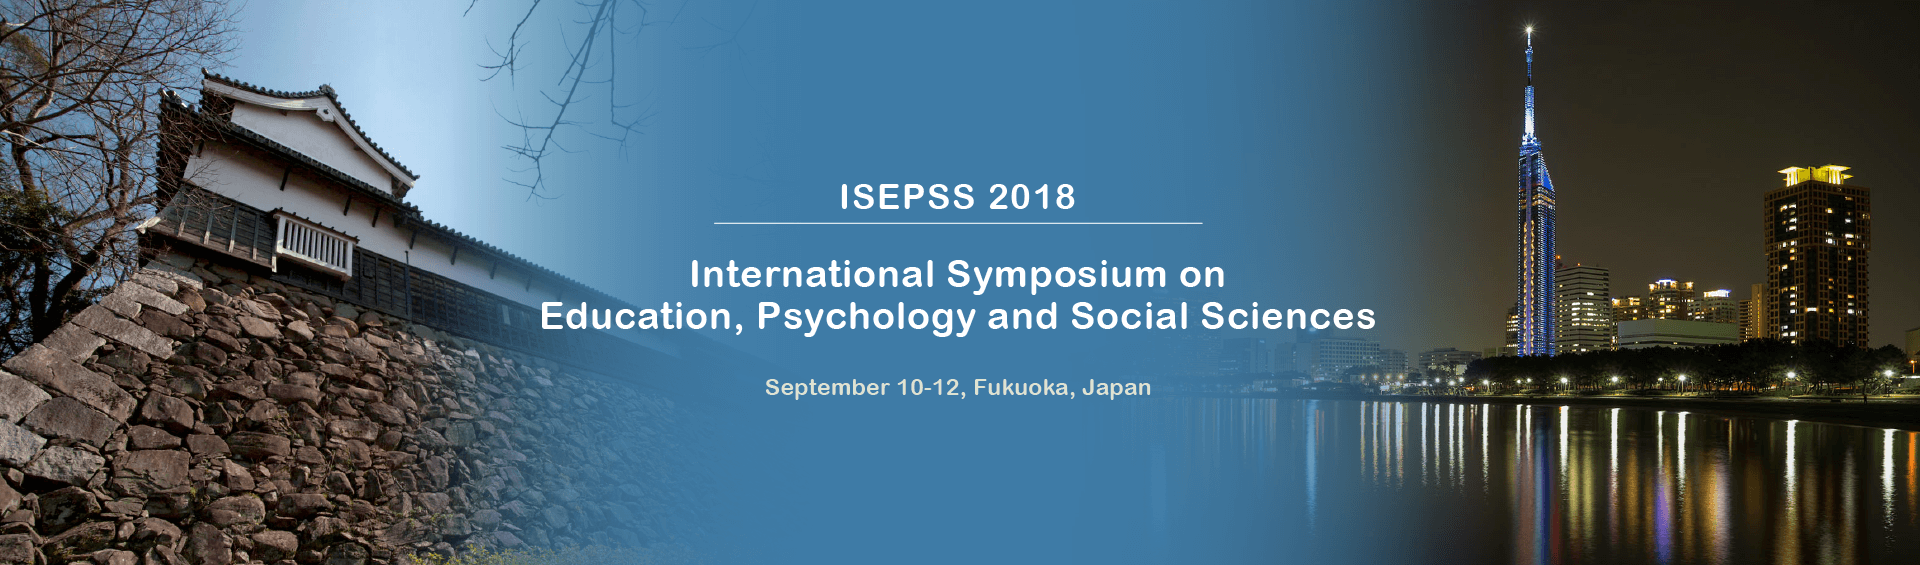 The 6th International Symposium on Education, Psychology and Social Sciences